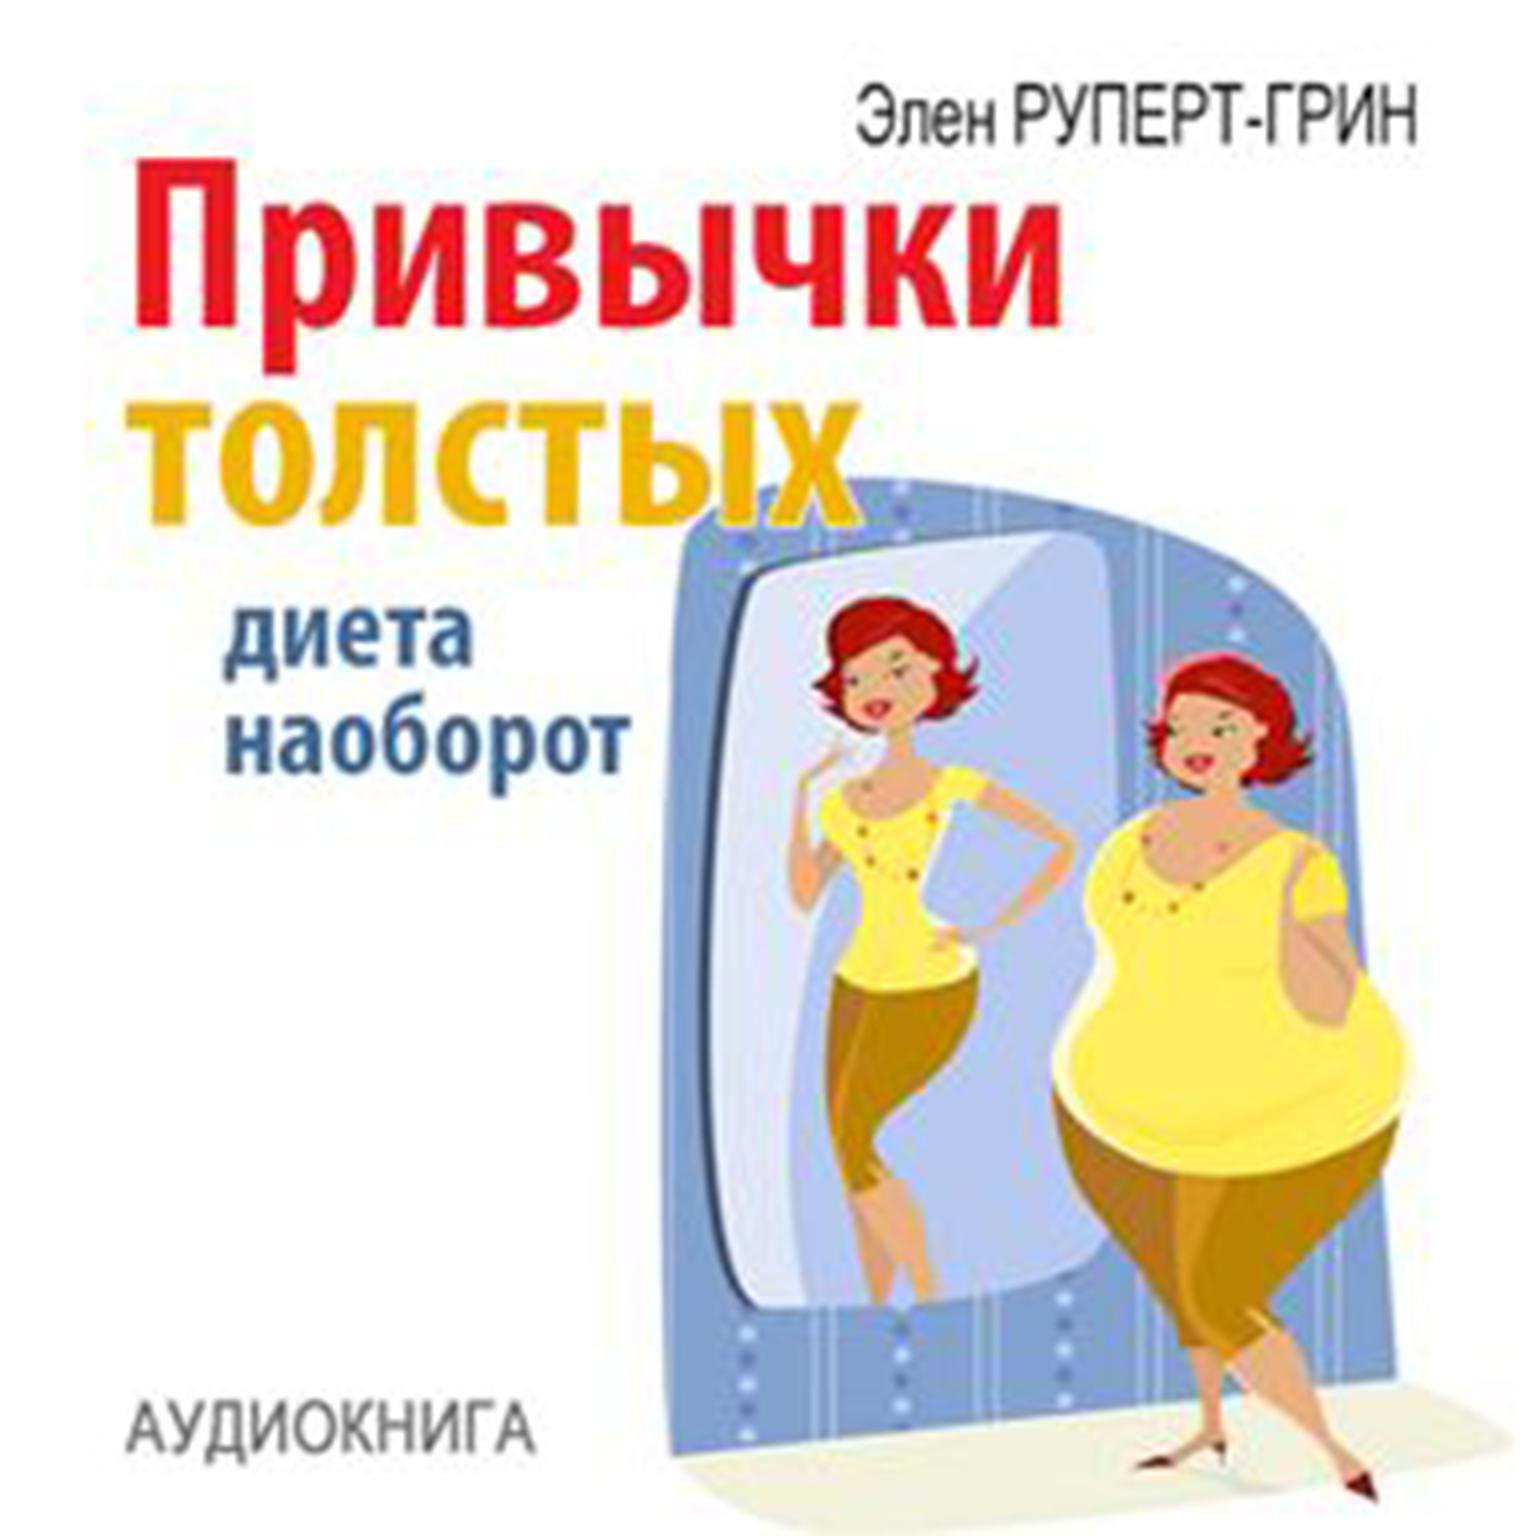 Habits of fat. Diet Conversely [Russian Edition] Audiobook, by Helena Rupert-Grin